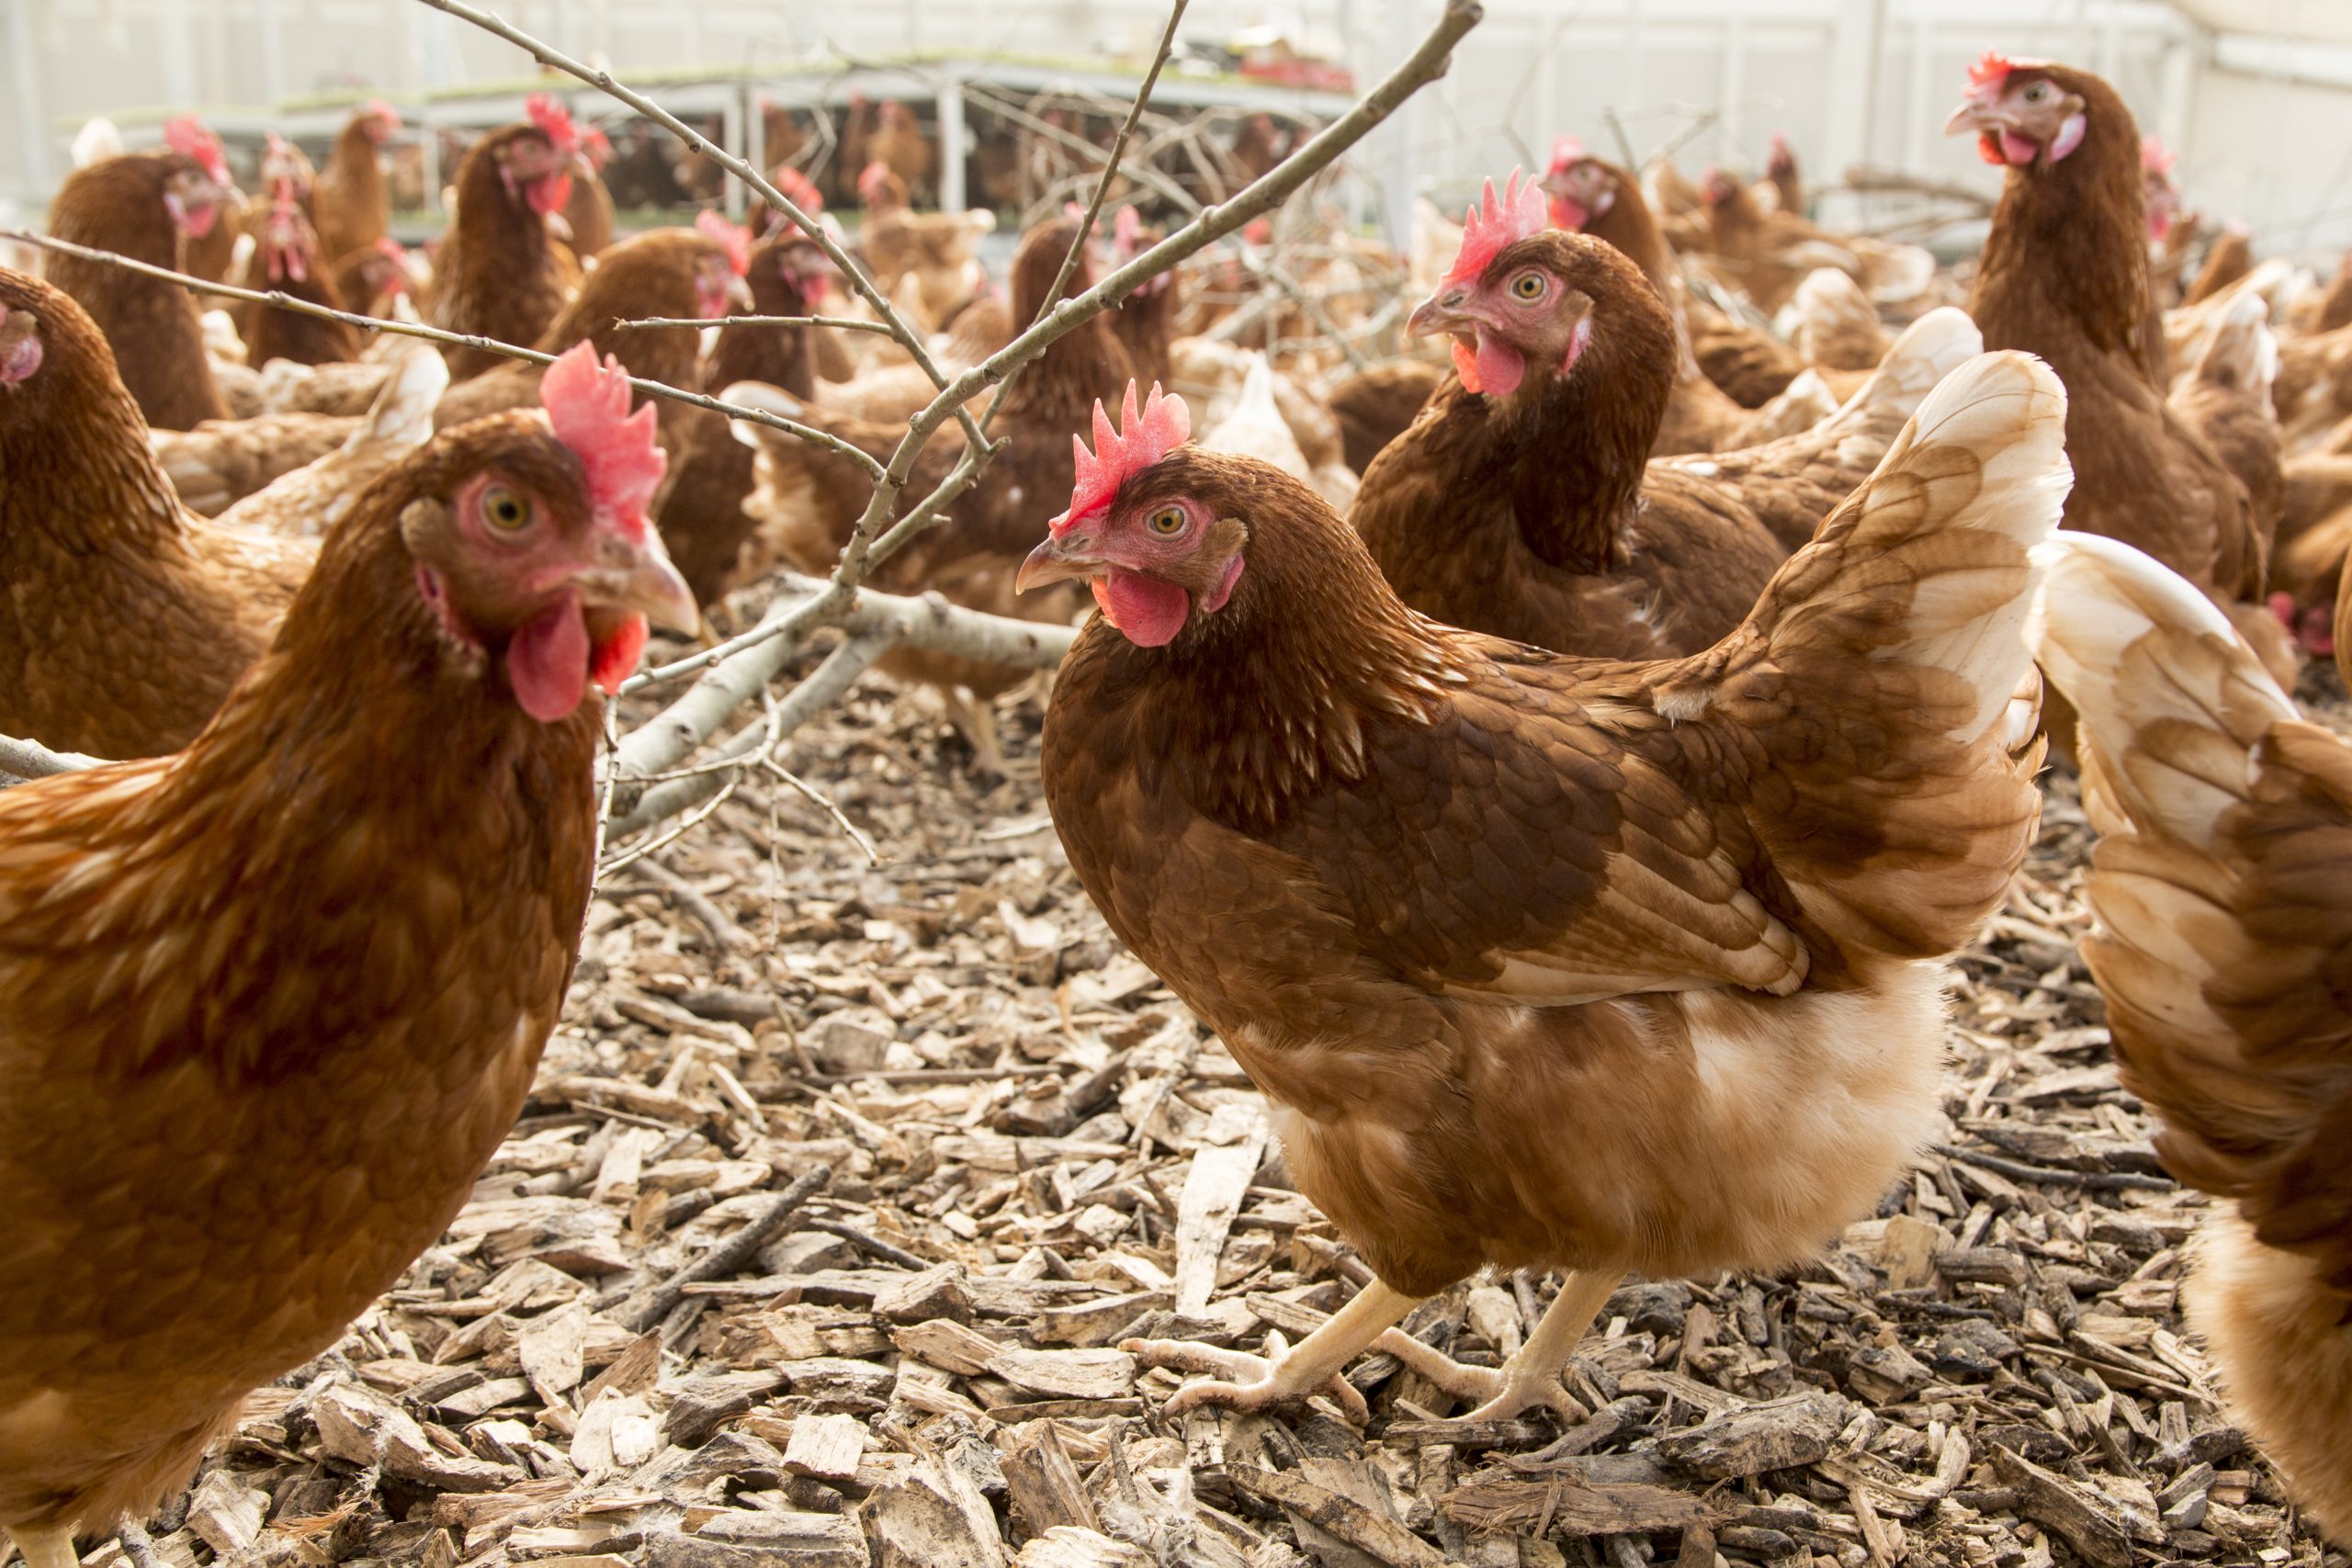 Studies are underway to confirm the findings in laying hens with other oils that are rich in oleic acid.